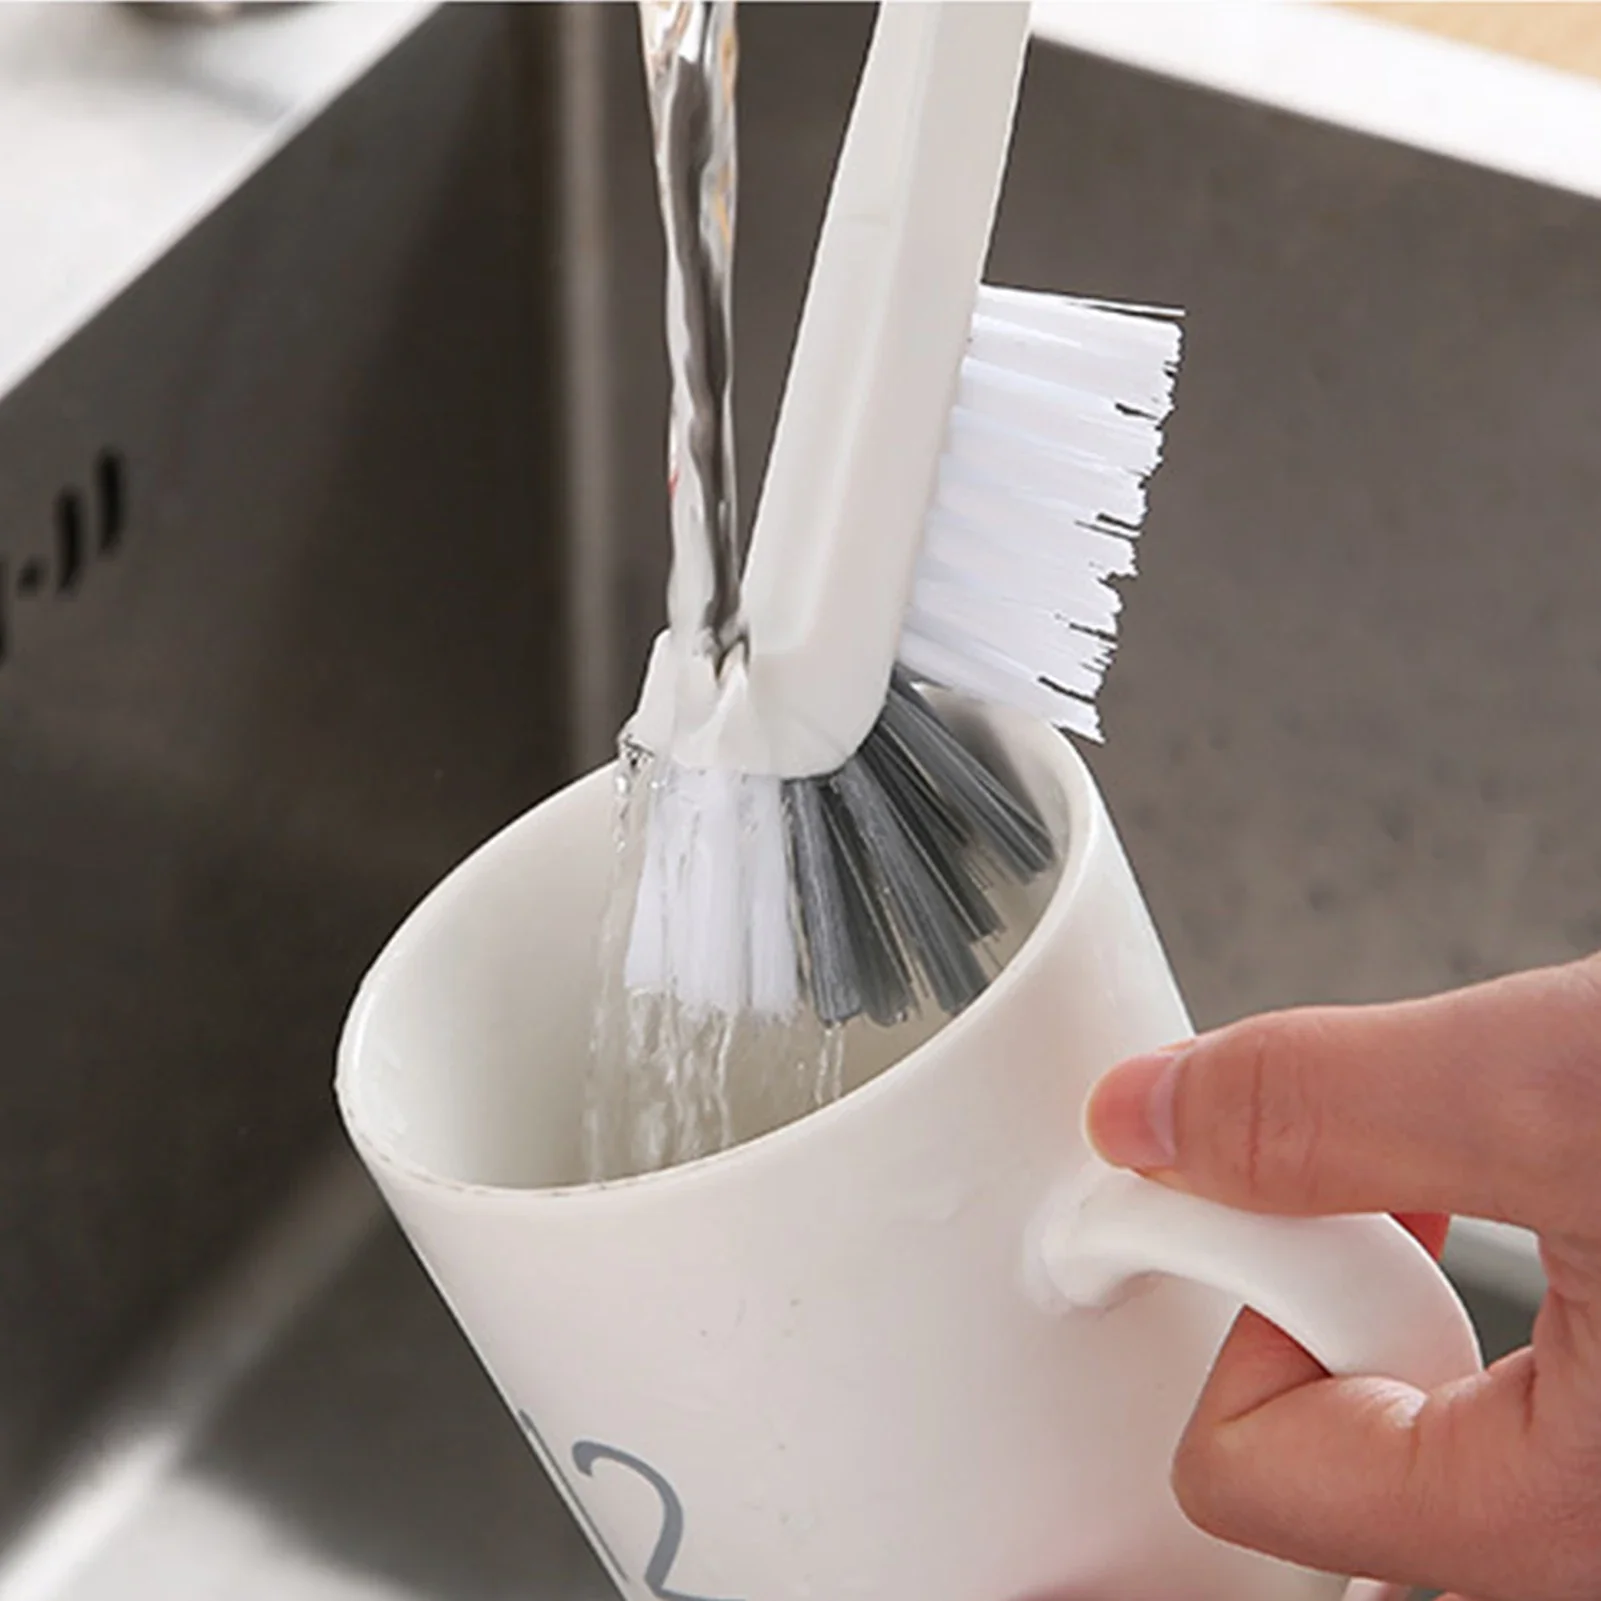 https://ae01.alicdn.com/kf/S17c188129c6b49ddb18f9523ce1d5b04r/Edge-Corner-Brushes-with-Bending-Handle-Kitchen-Scrub-Tools-for-Cups-Sink-Cleaning-Brush-Durable-Design.jpg